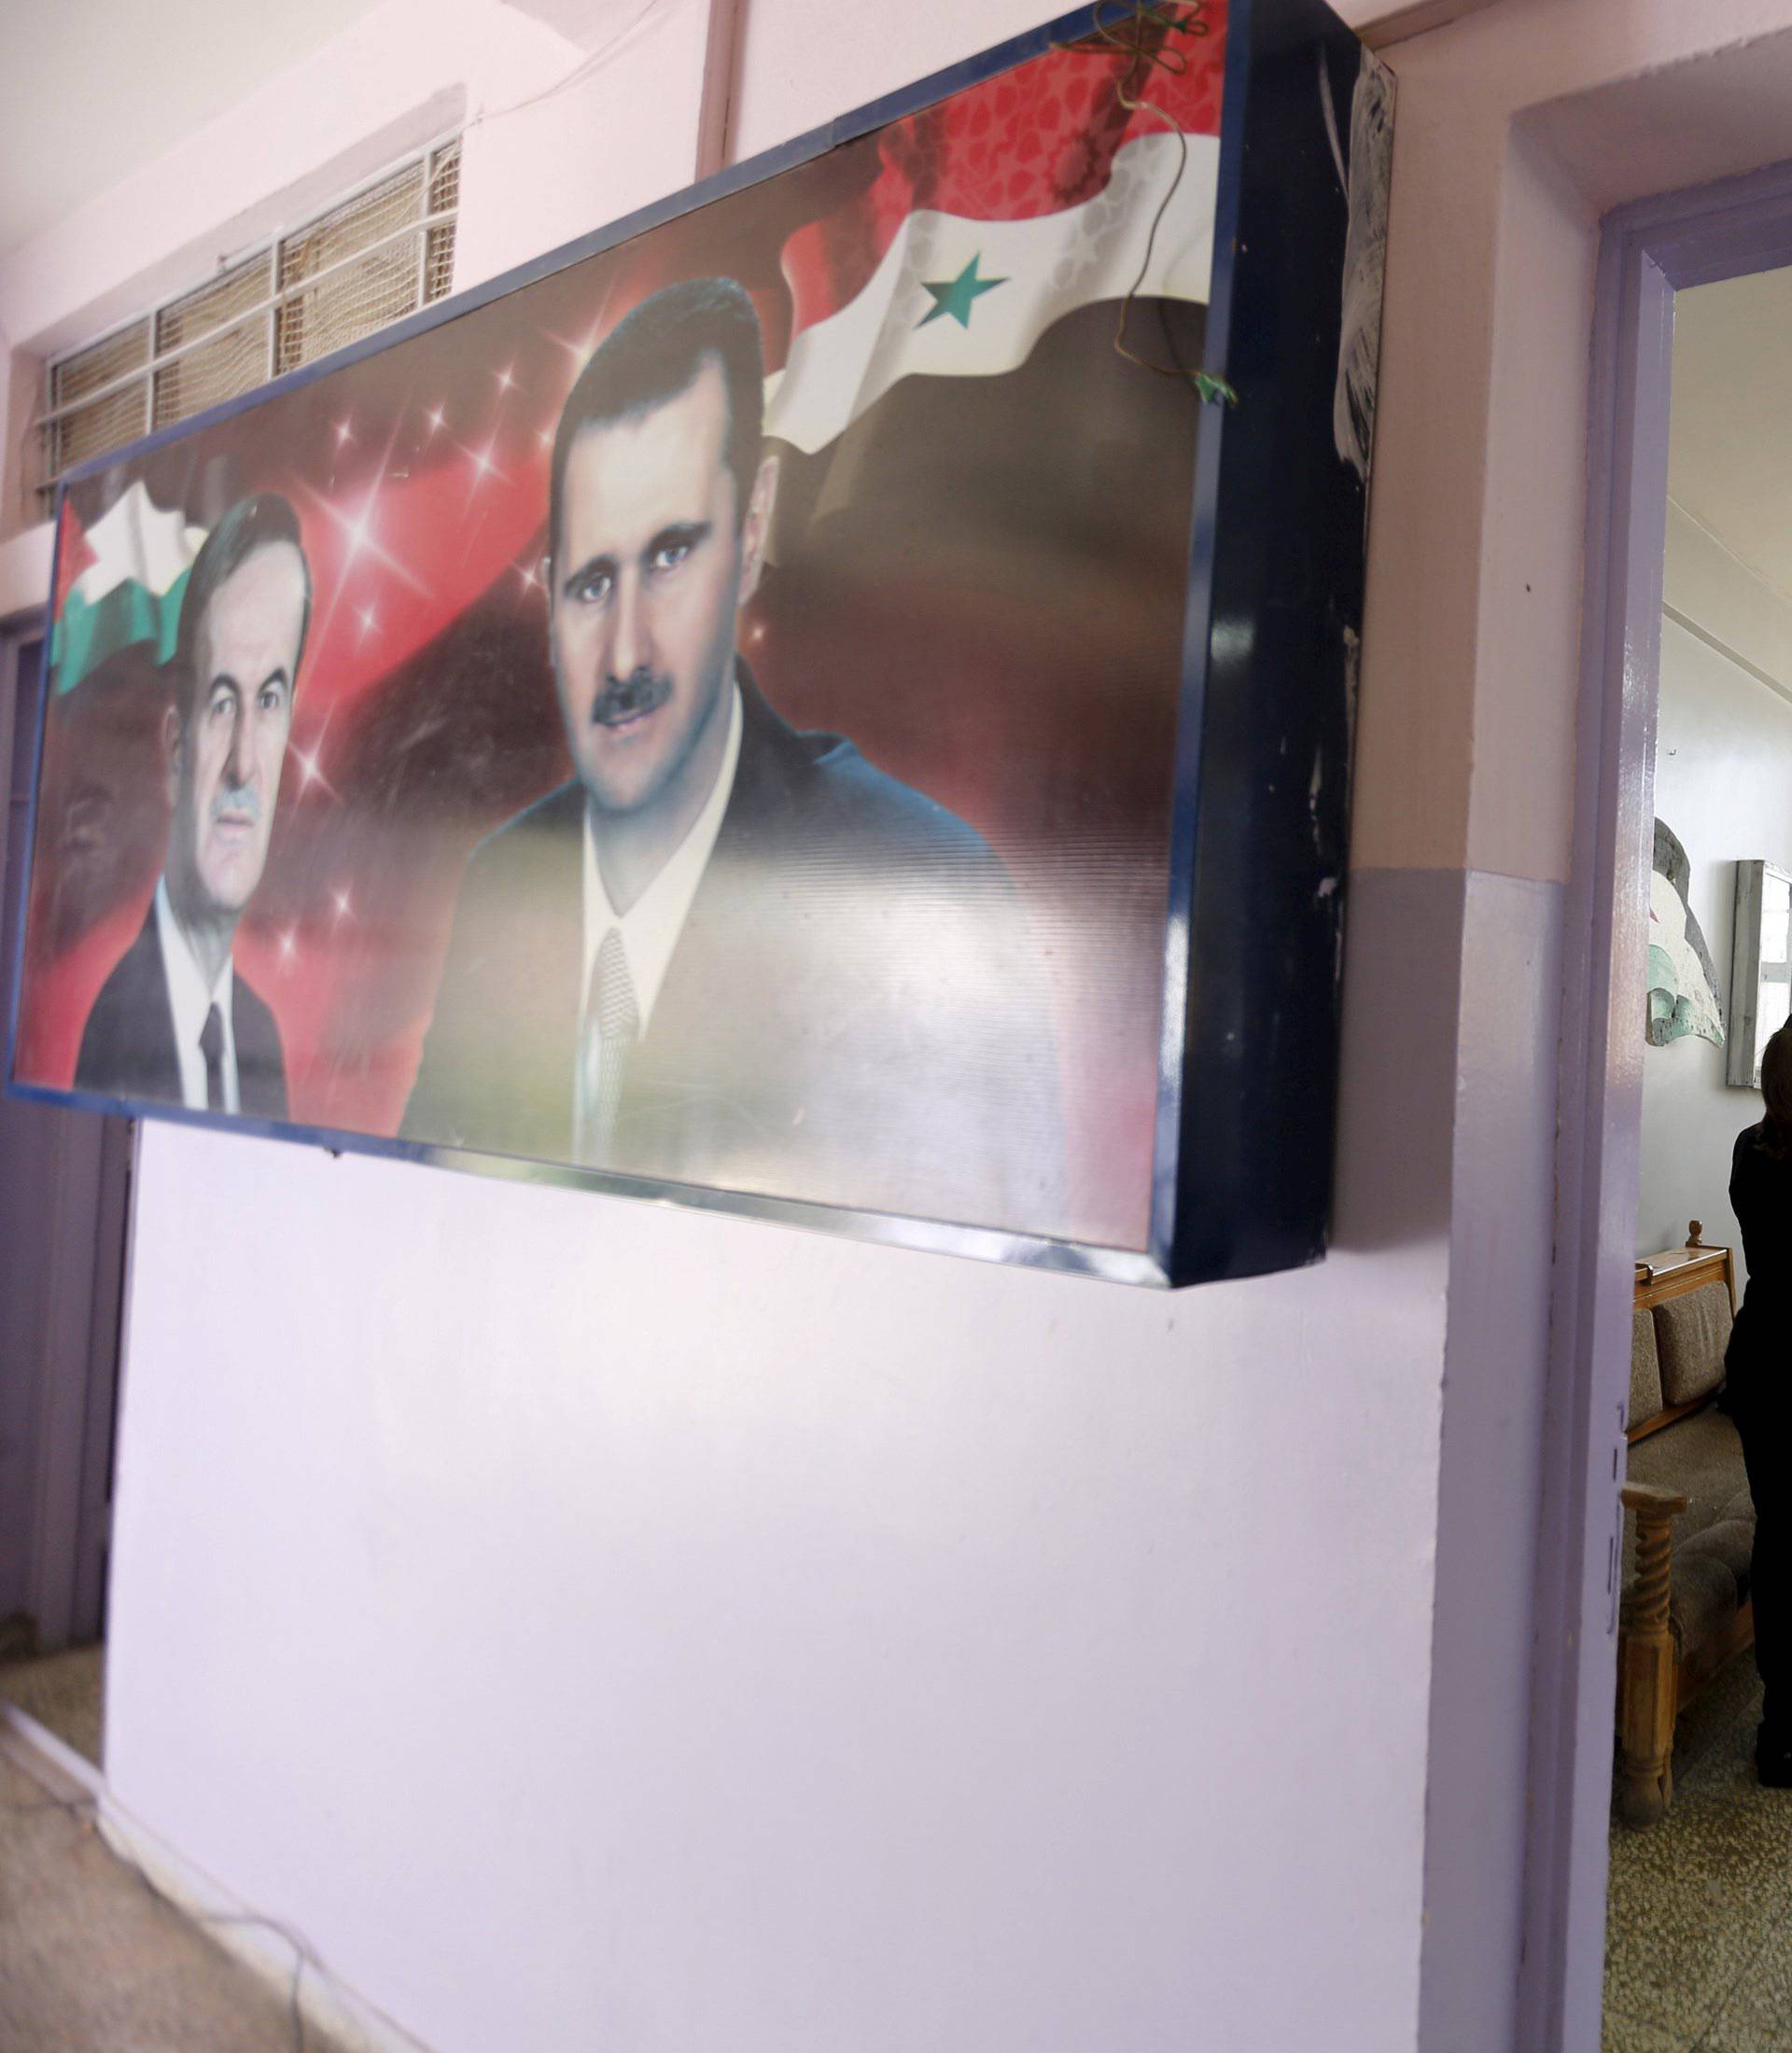 A banner showing Syria's president Bashar al-Assad and his father, former president Hafez al-Assad is seen inside a polling station during the parliamentary elections in Damascus